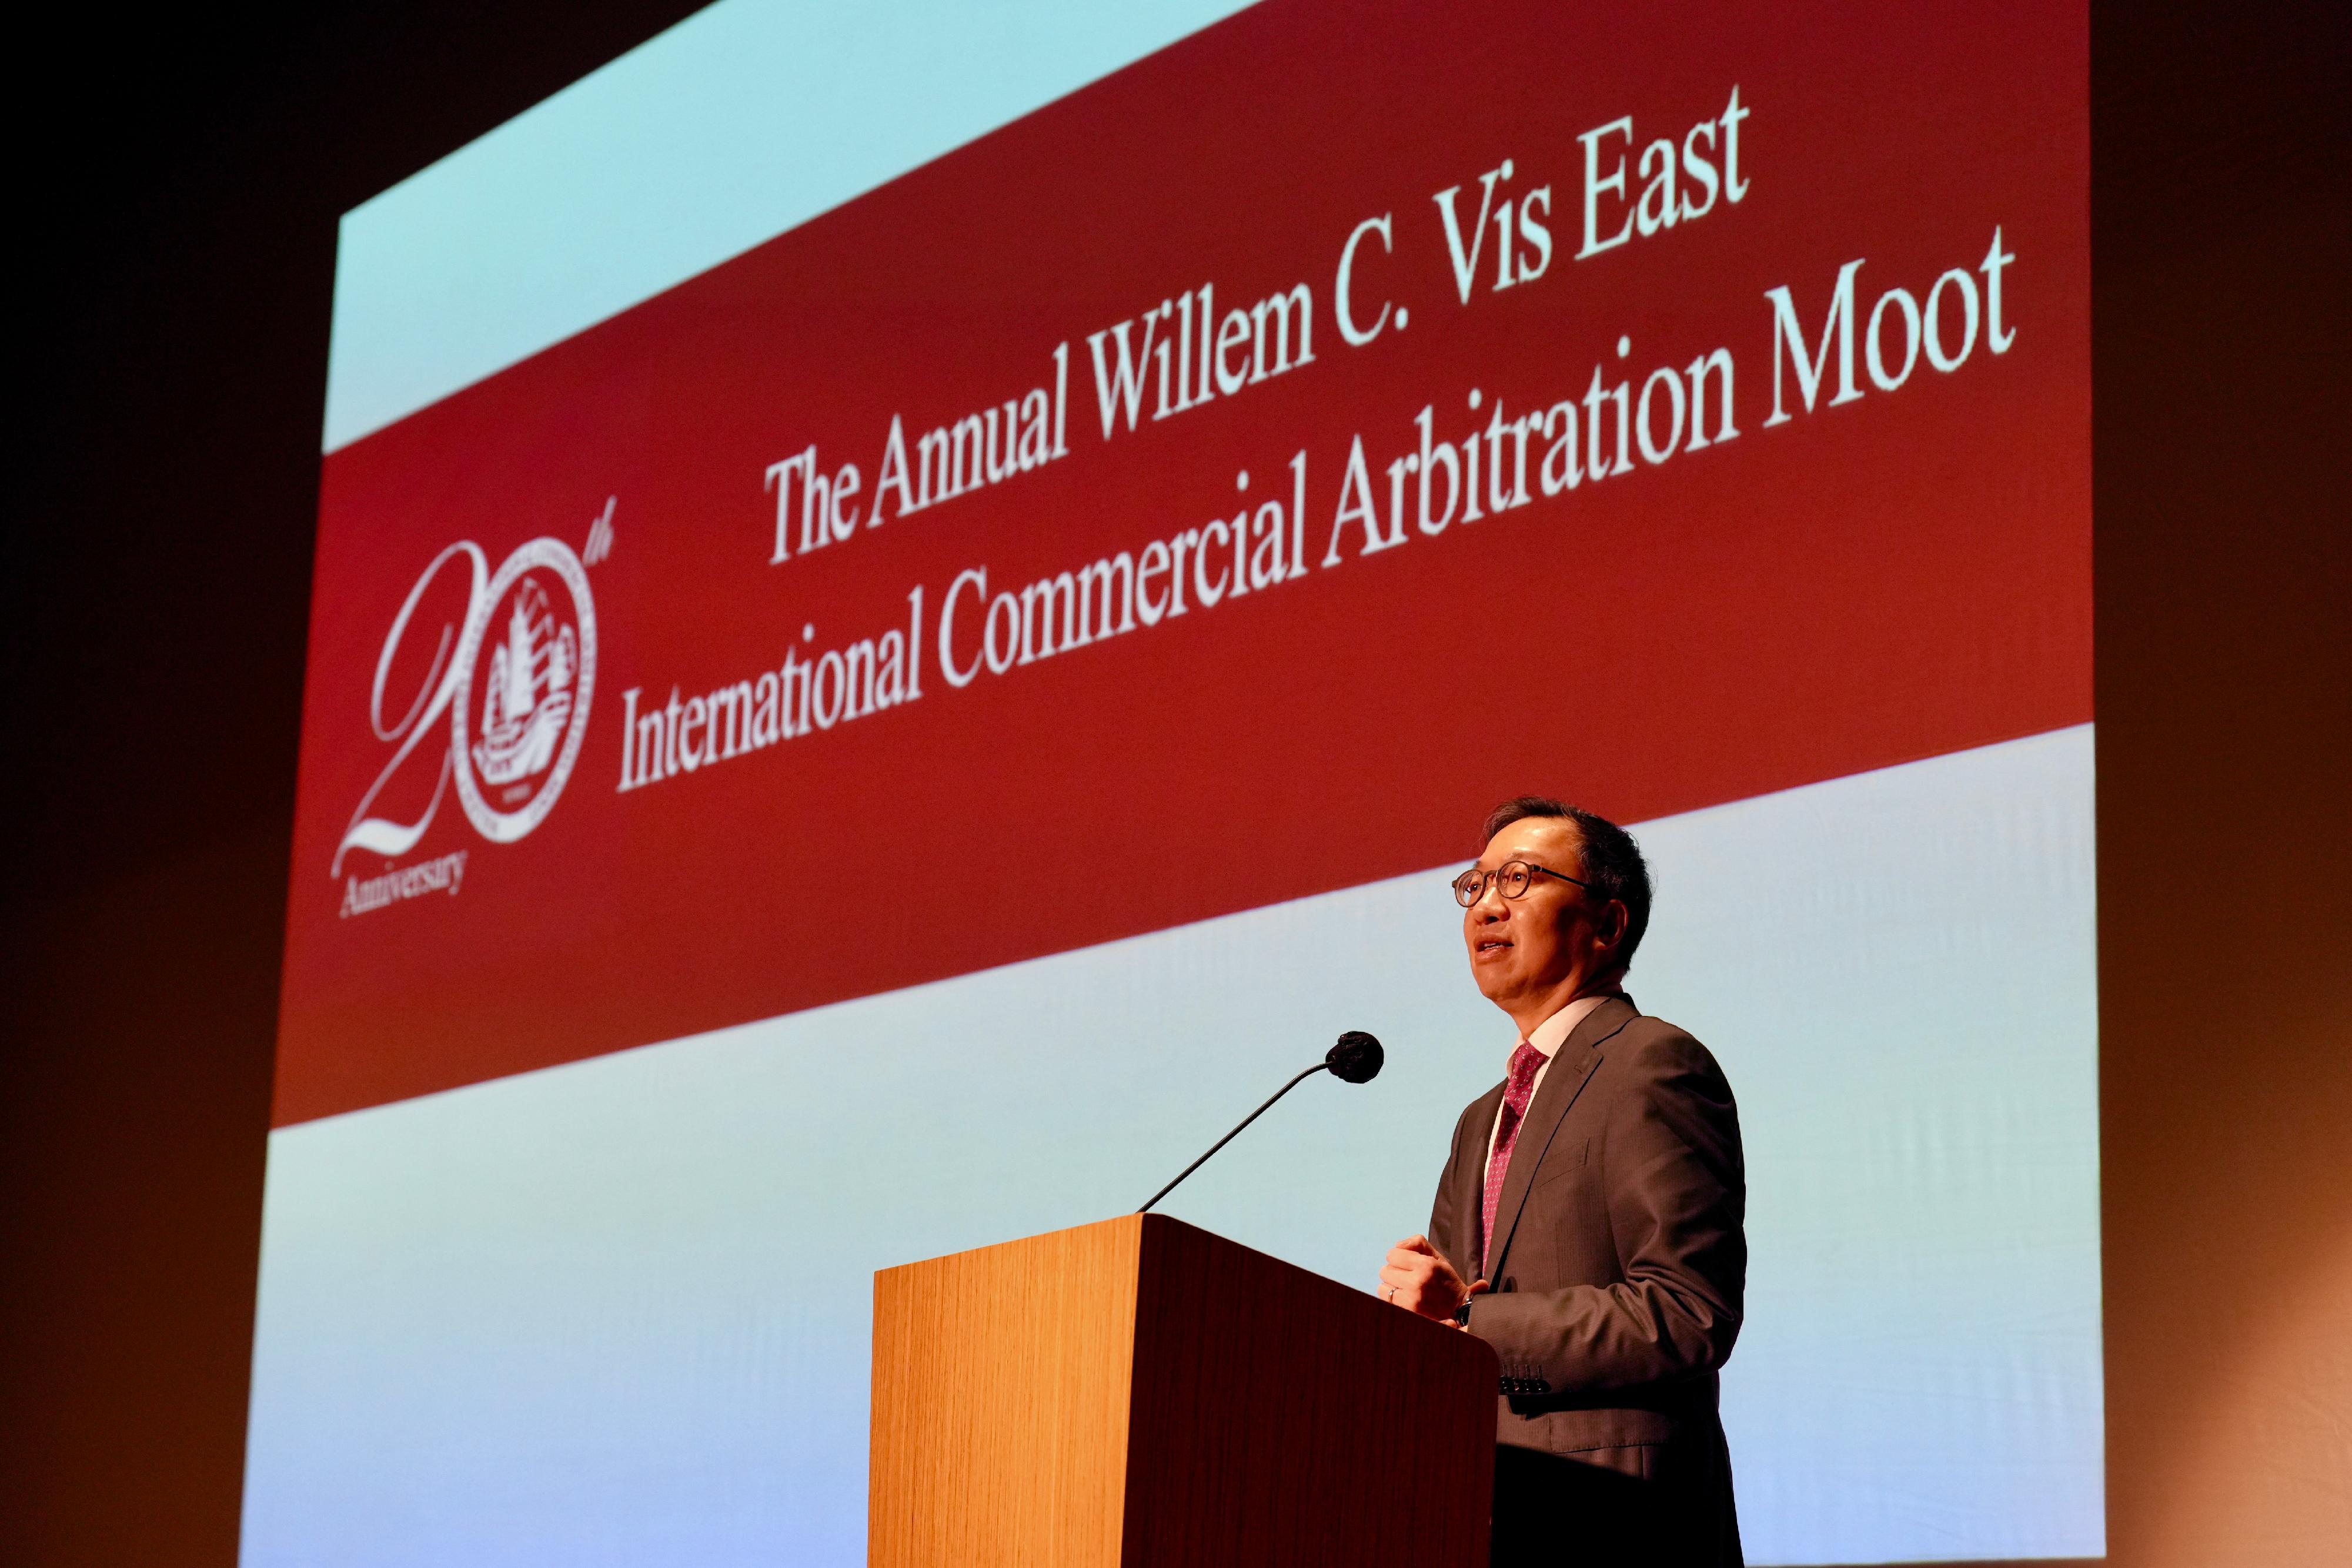 The Secretary for Justice, Mr Paul Lam, SC, speaks at the opening ceremony of 20th Willem C Vis East International Commercial Arbitration Moot today (March 19).